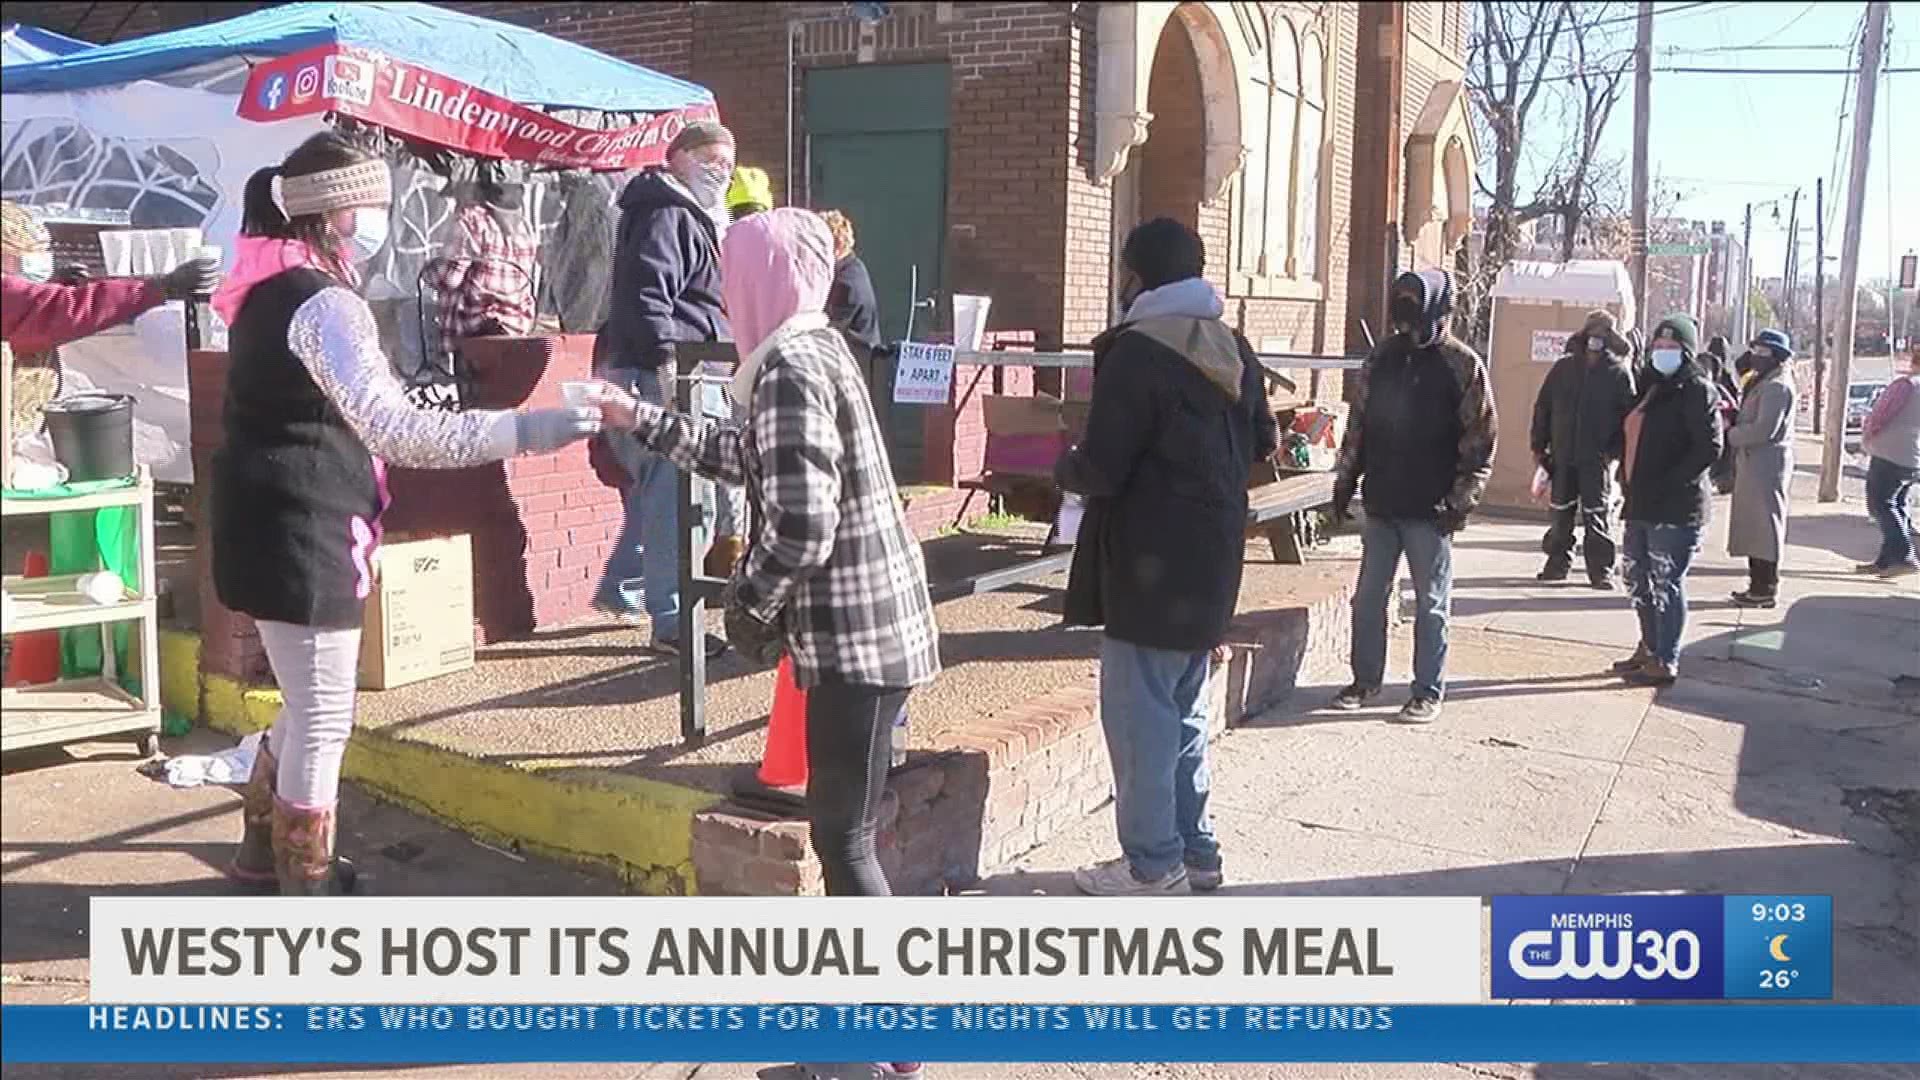 A cold wind didn't chill the passions of folks, spending this Christmas Day feeding and clothing the needy.